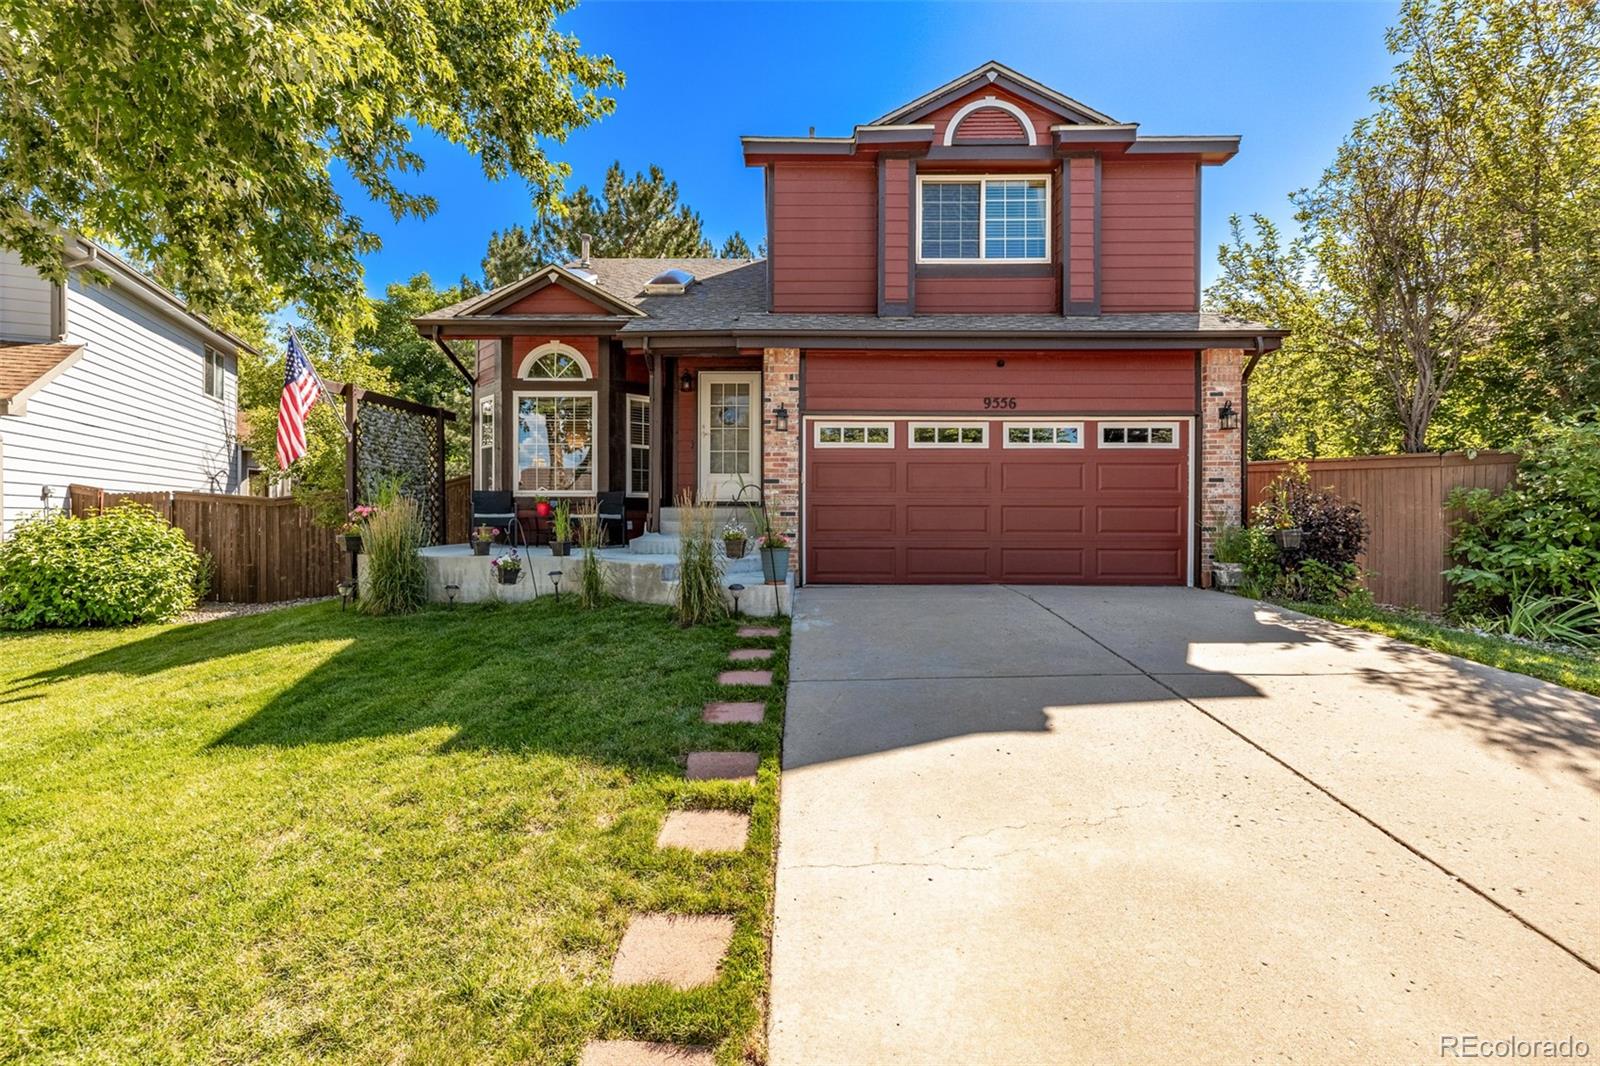 9556  pinebrook street, Highlands Ranch sold home. Closed on 2024-04-25 for $667,000.